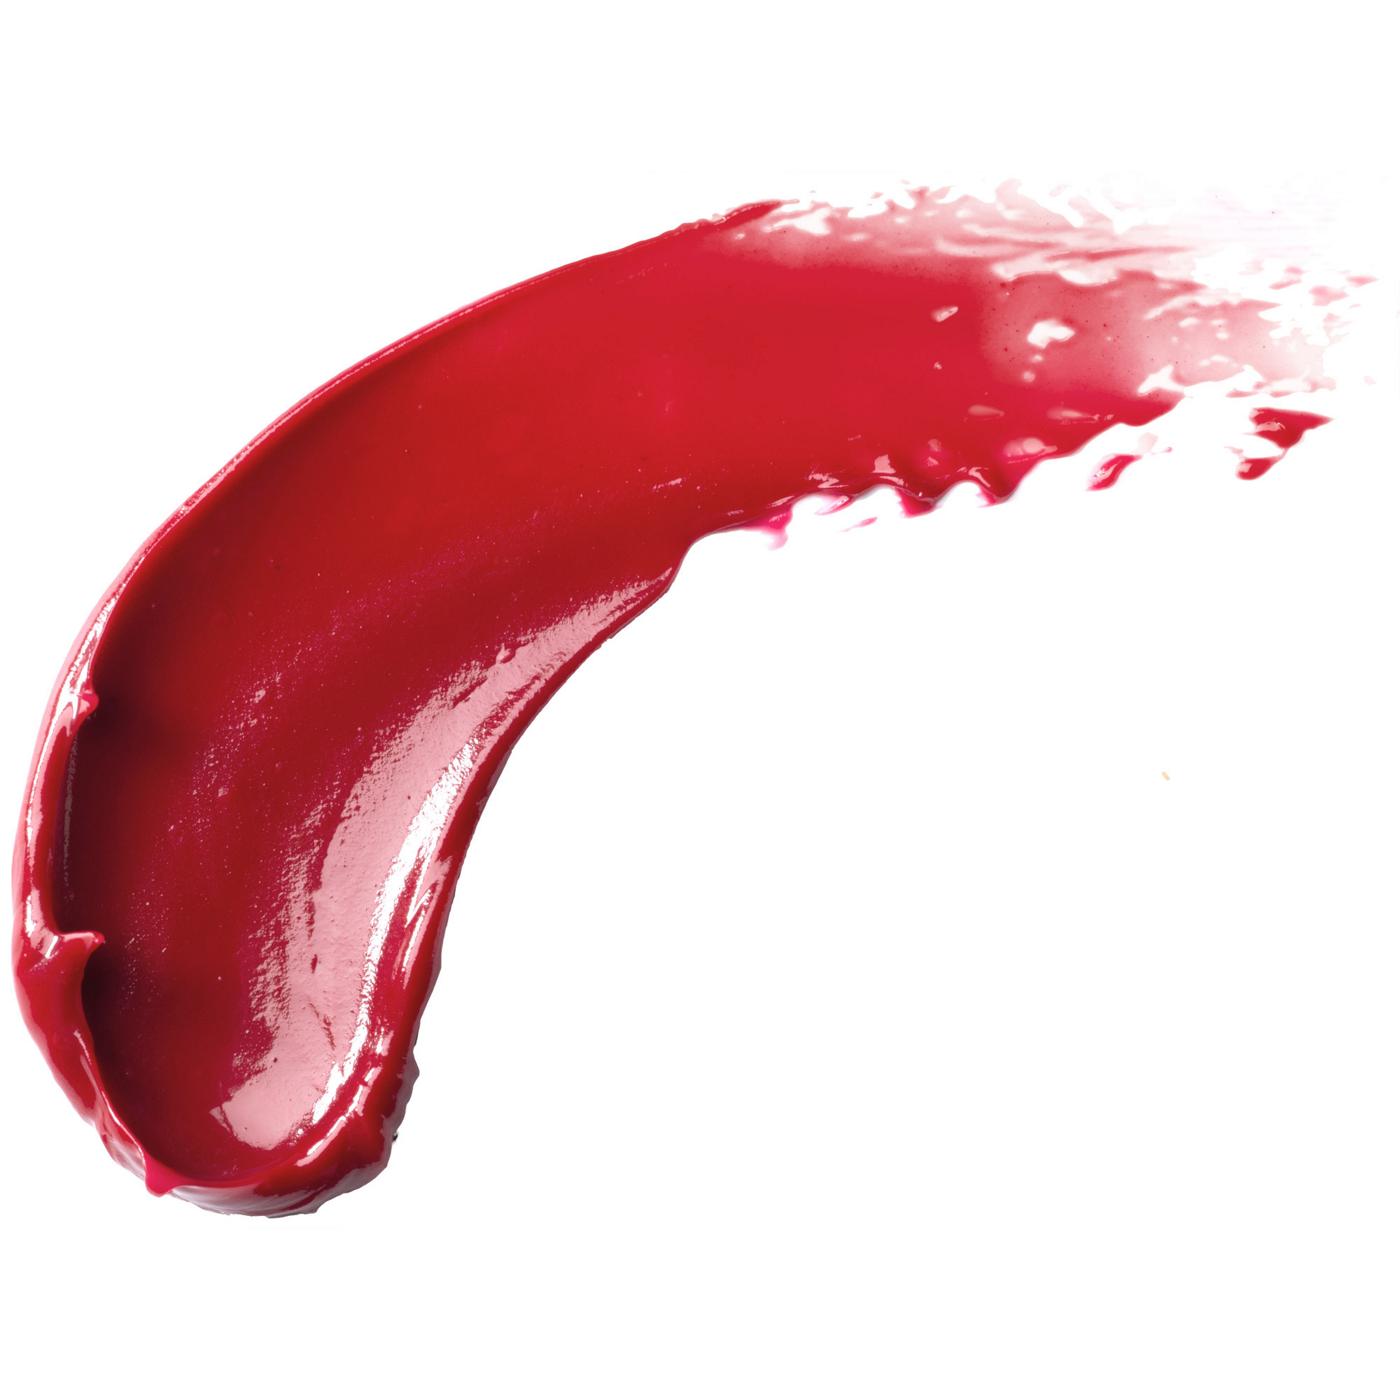 Burt's Bees Squeezy Tinted Lip Balm - Berry Sorbet; image 5 of 10